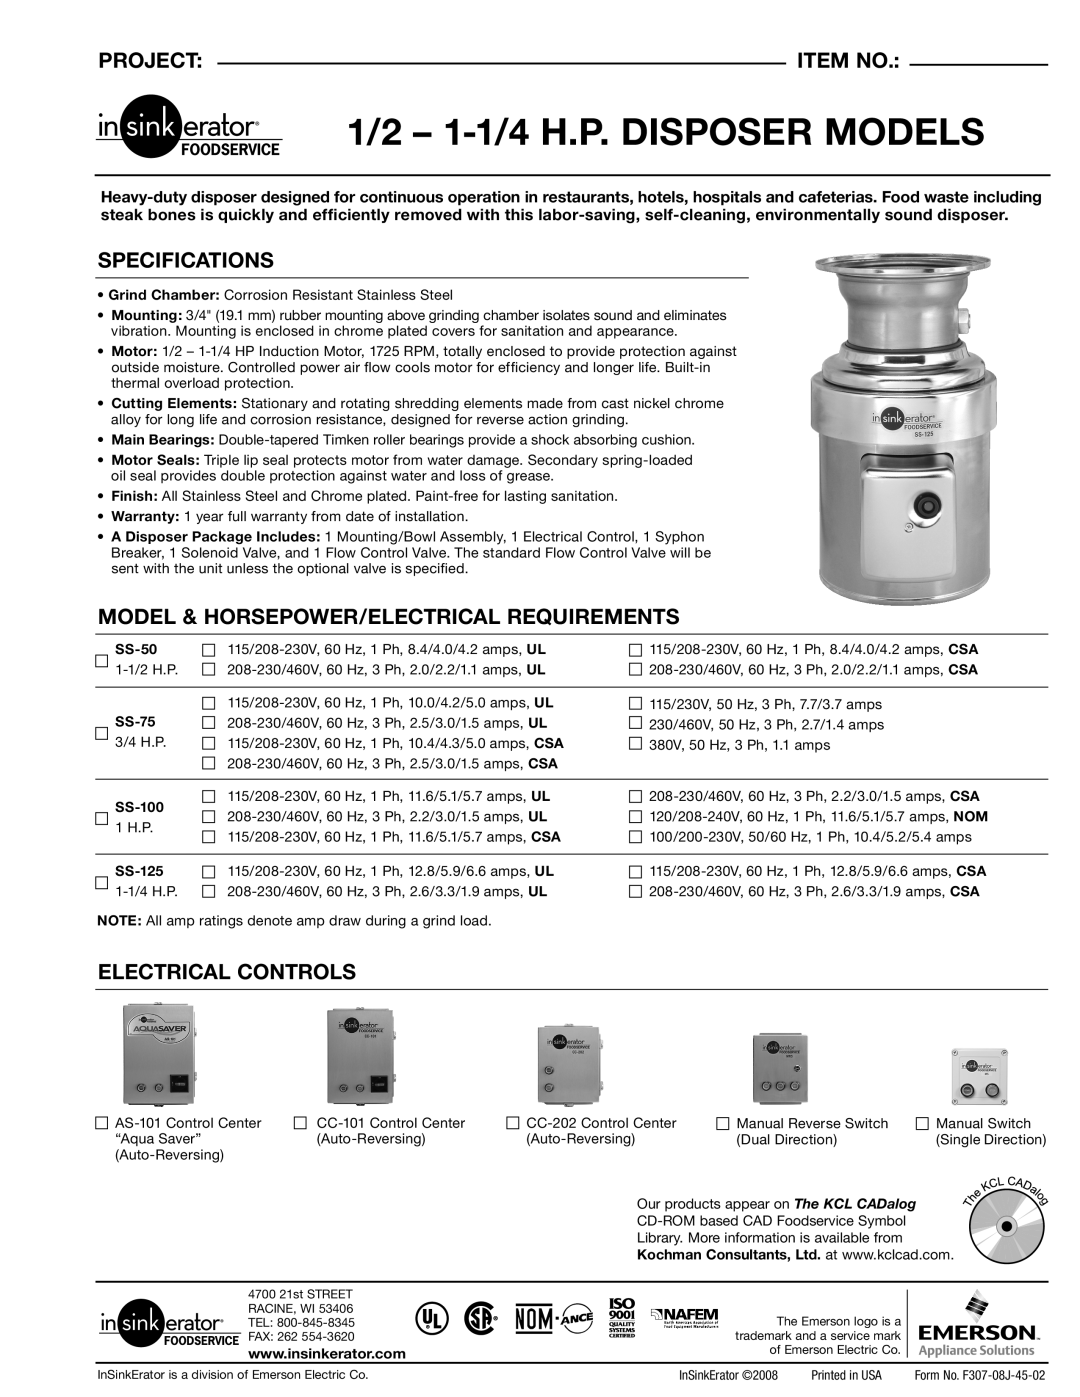 InSinkErator 1/21-1/4H.P specifications Project, Item No, Specifications, Model & Horsepower/Electrical Requirements 